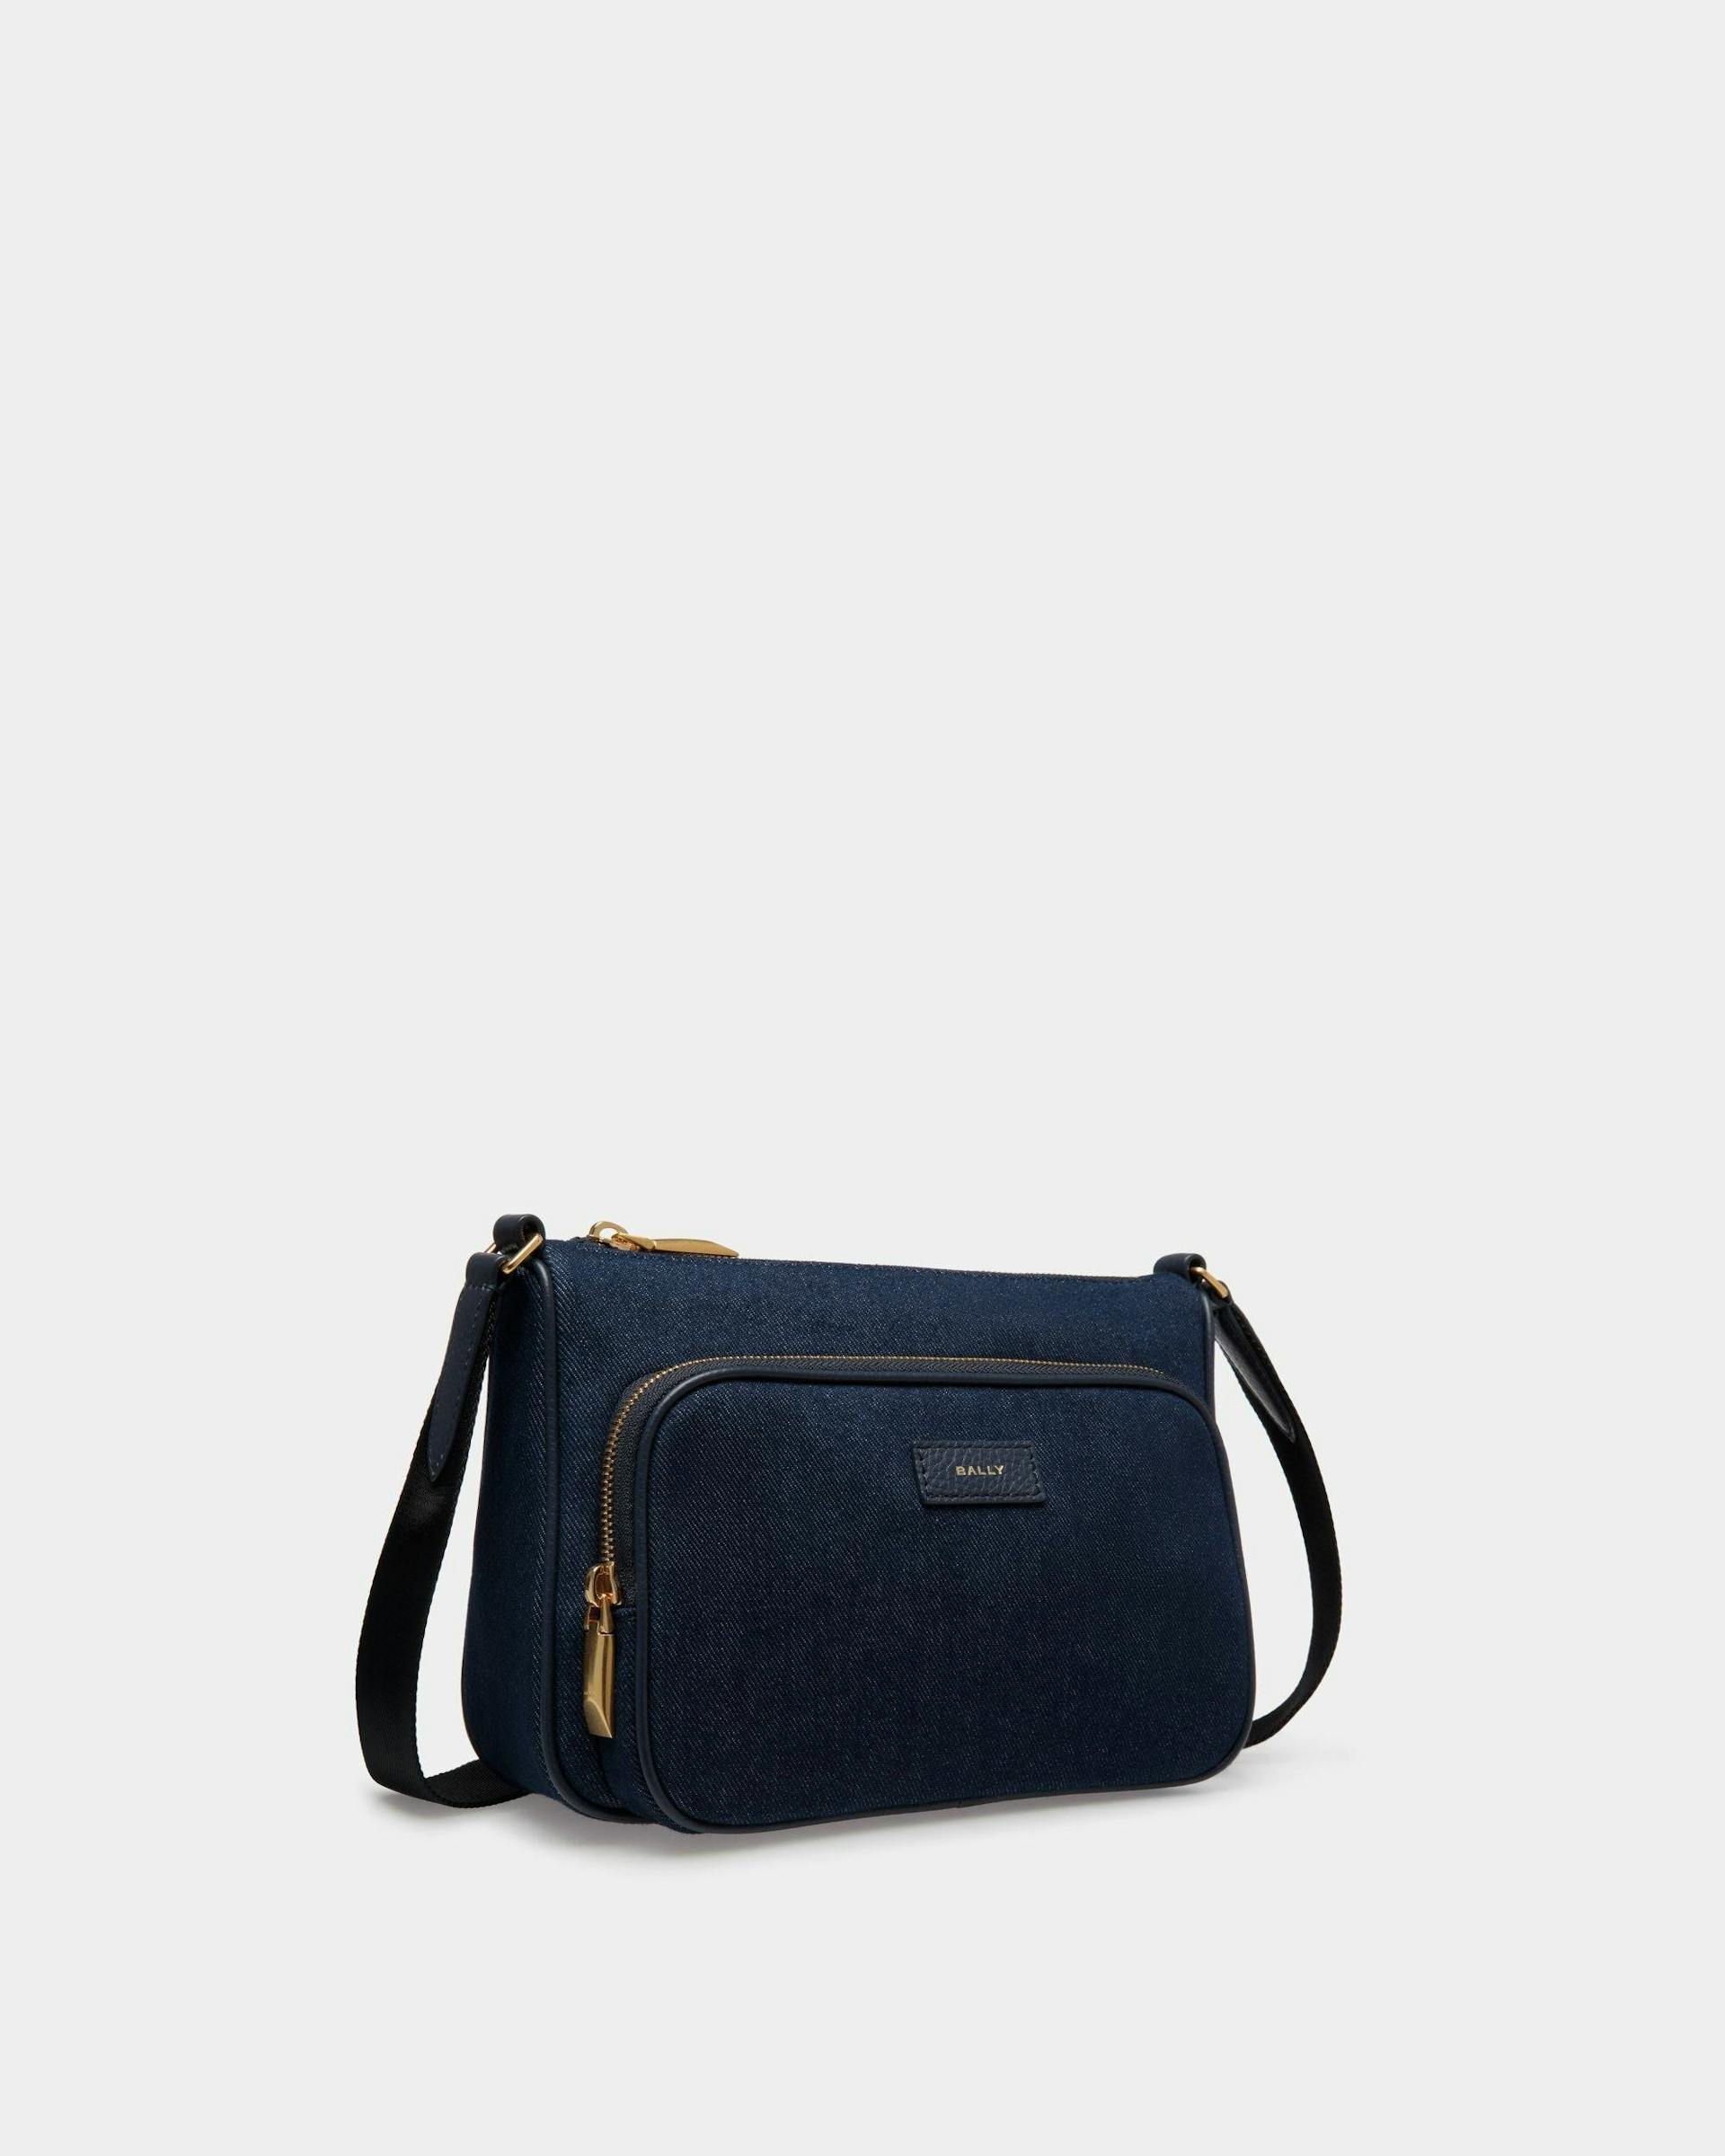 Men's Bar Crossbody Bag in Canvas And Leather | Bally | Still Life 3/4 Front